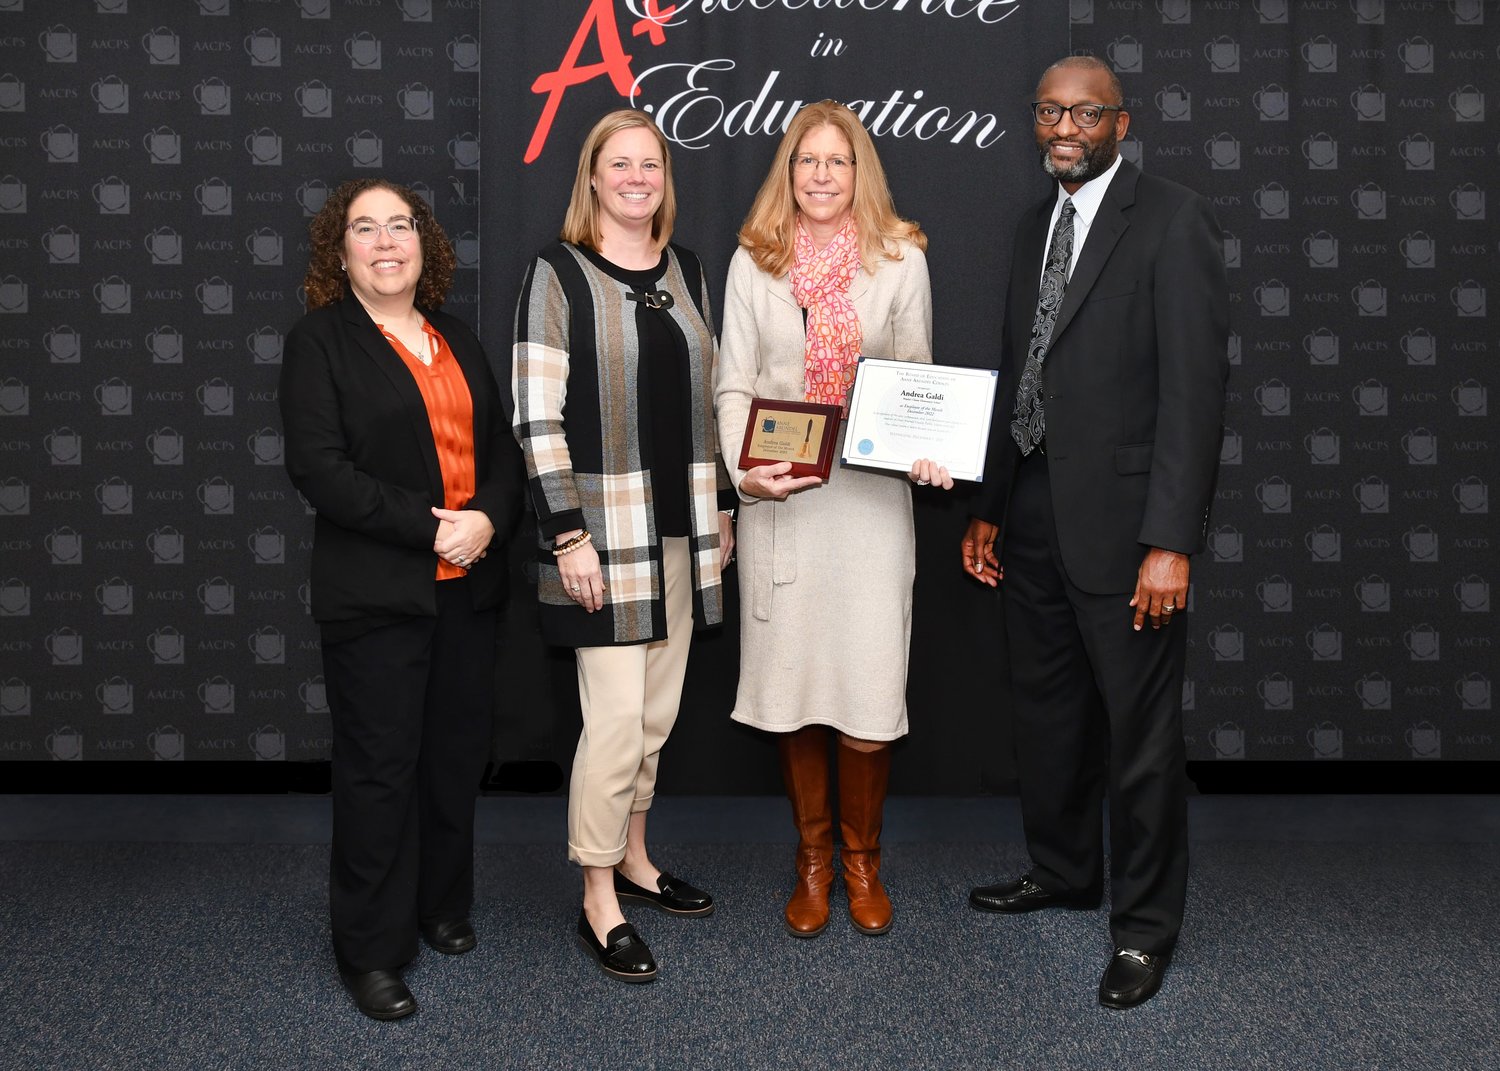 Andrea Galdi was the Anne Arundel County Public Schools Employee of the Month in December.